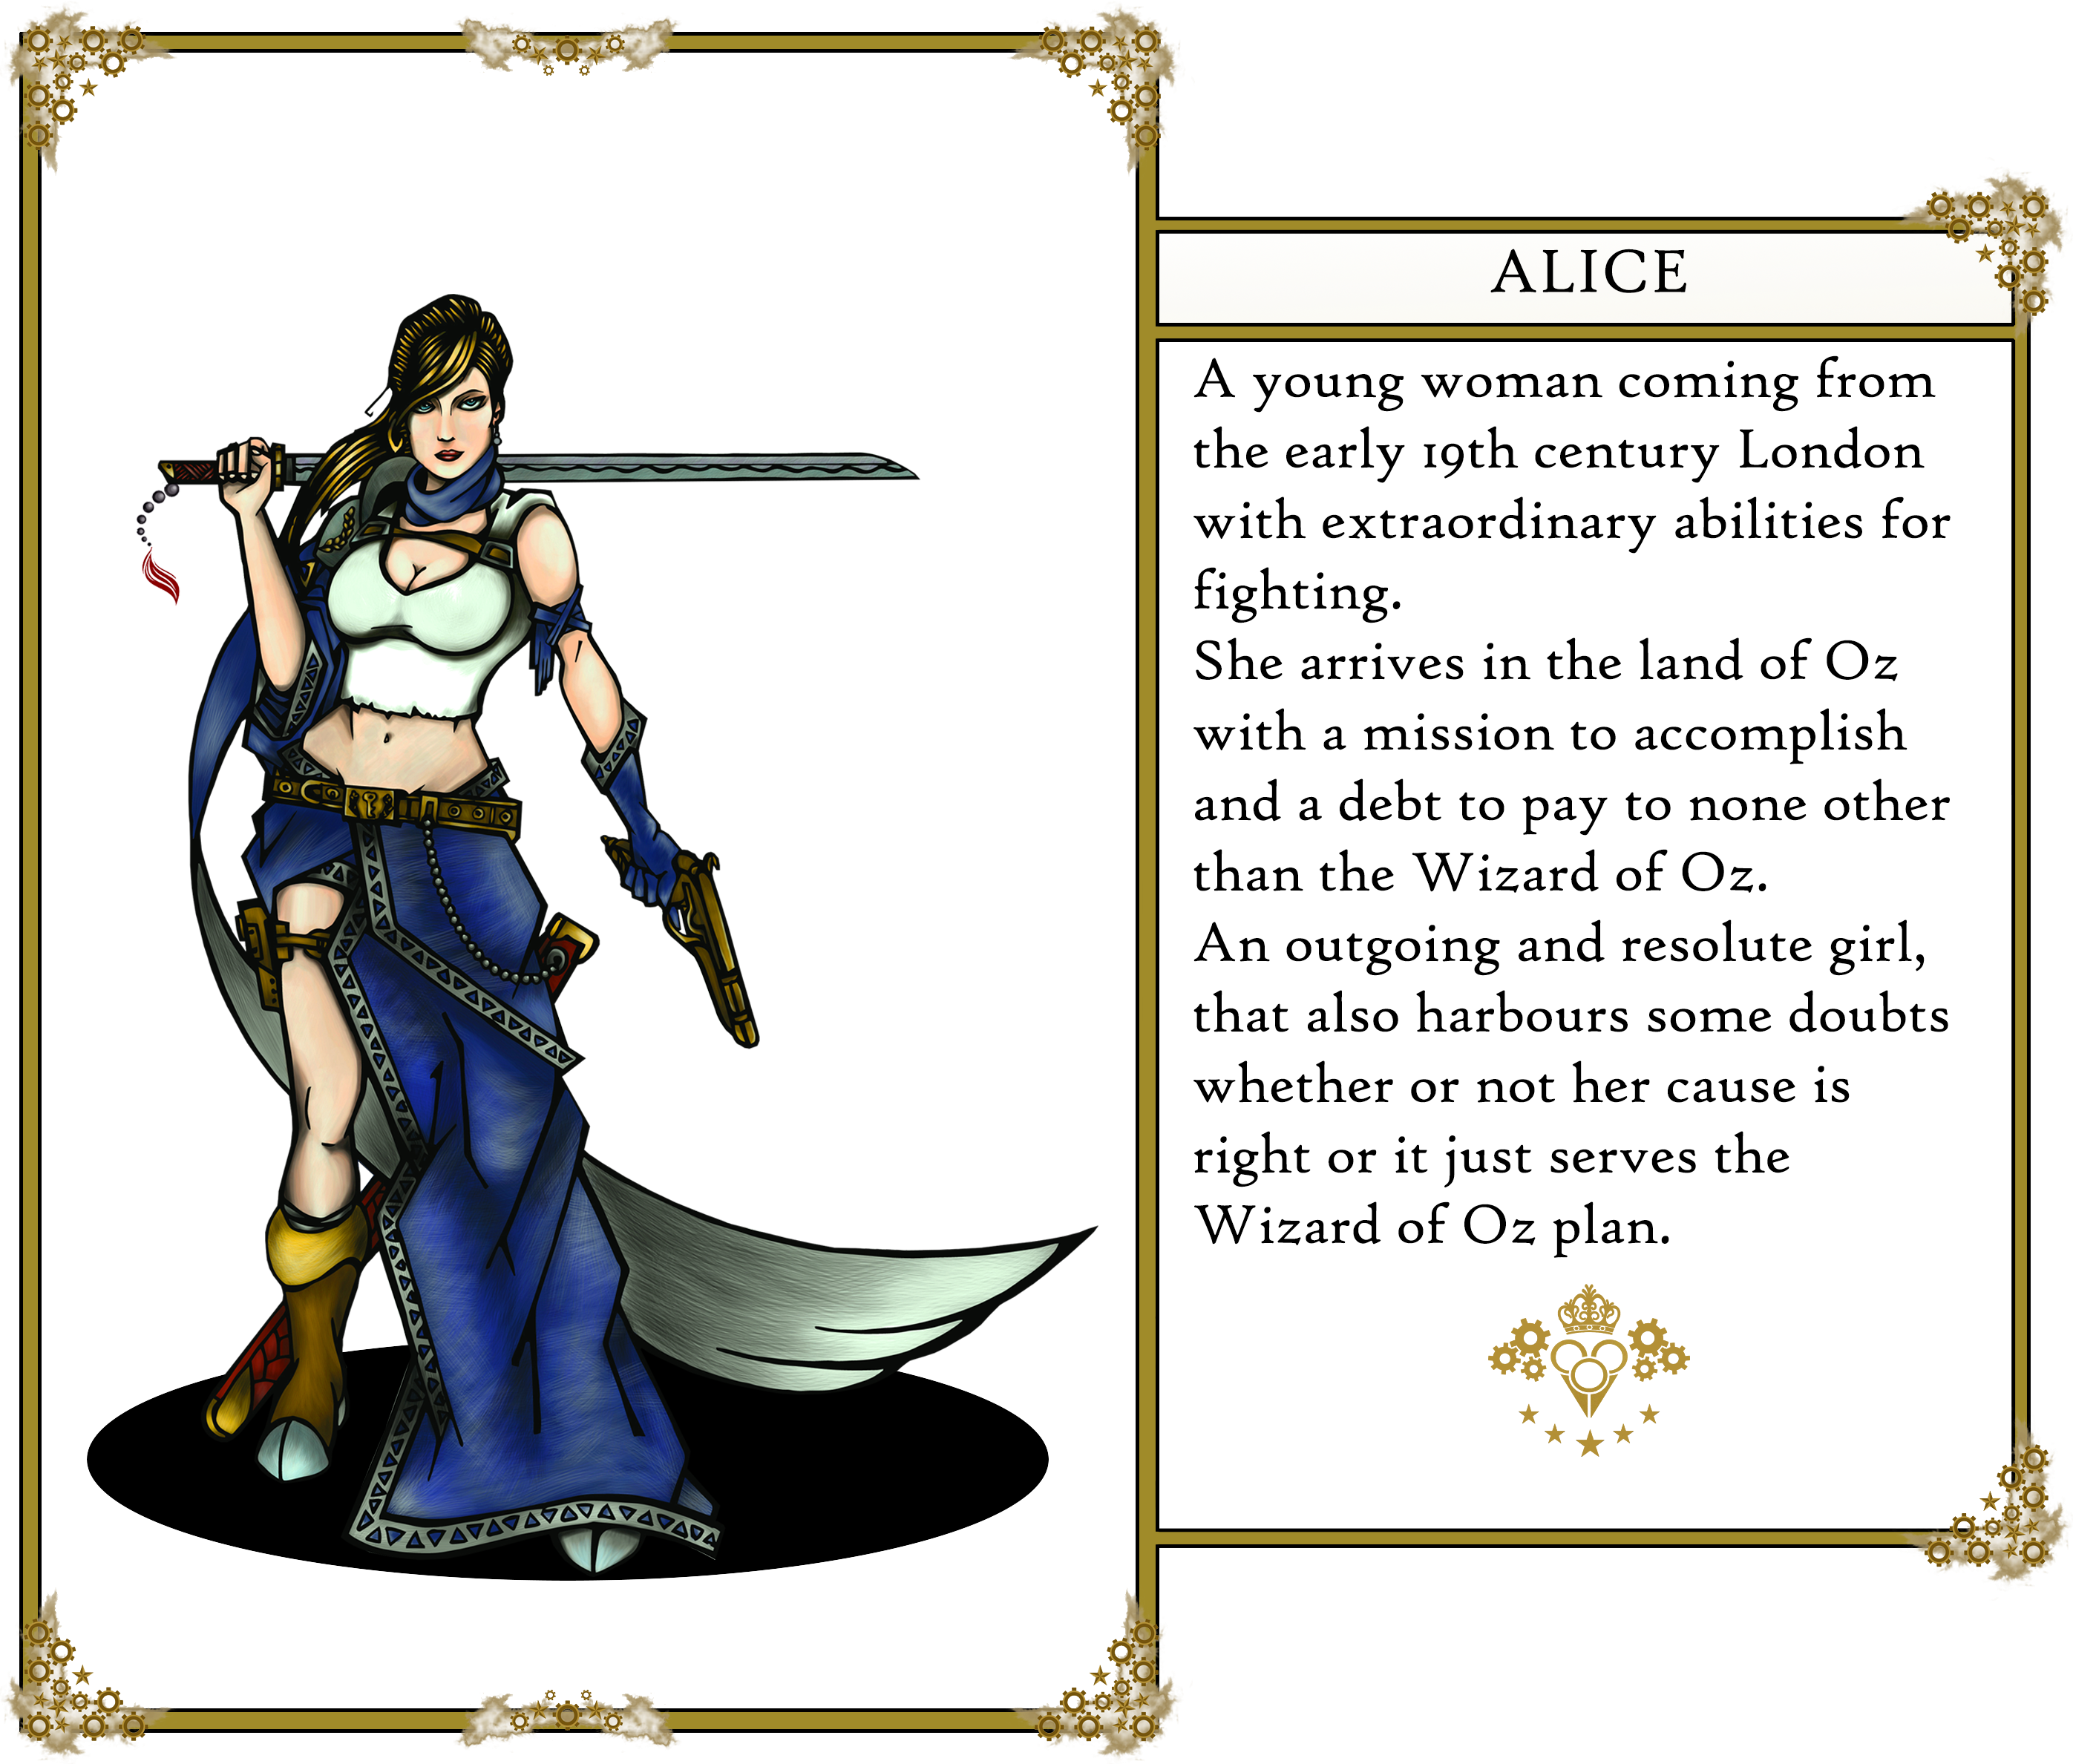 The Oz's tales. Alice: 
                        A young woman coming from the early 19th century London with extraordinary abilities for fighting. 
                        She arrives in the land of Oz with a mission to accomplish and a debt to pay to none other than the Wizard of Oz. 
                        An outgoing and resolute girl, that also harbours some doubts whether or not her cause is right or it just serves the Wizard of Oz plan.